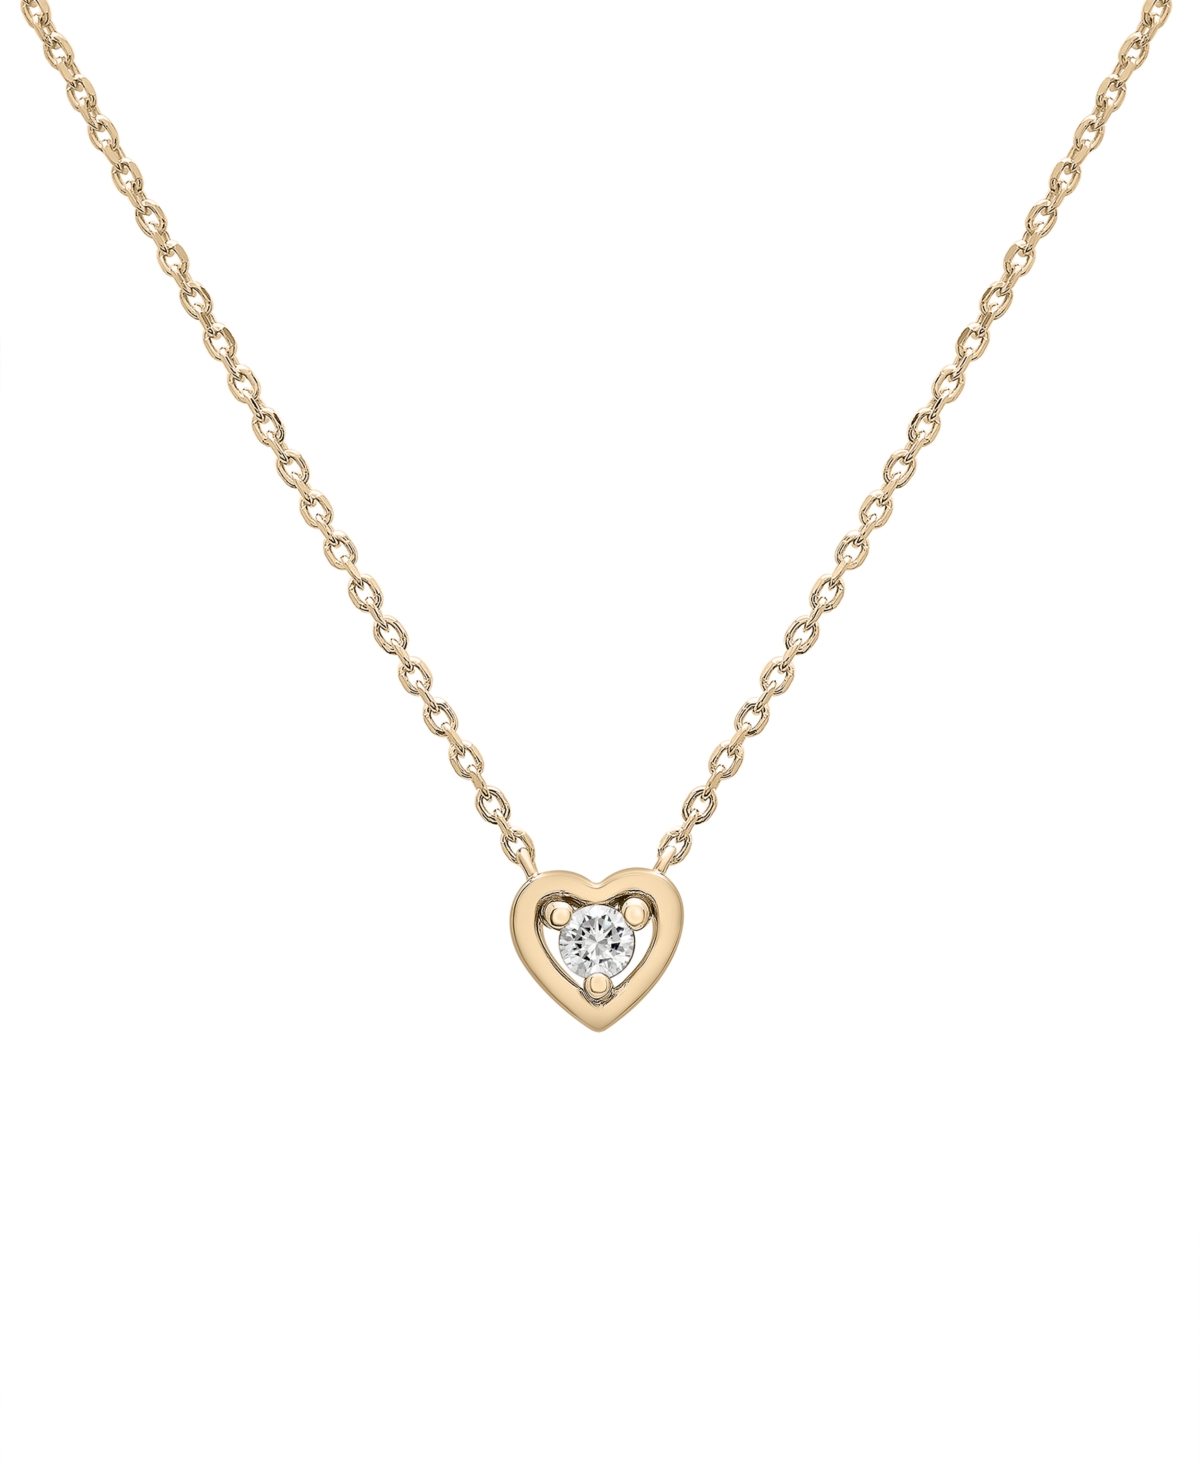 Diamond Heart 18" Pendant Necklace (1/10 ct. t.w.) in Gold Vermeil, Created for Macy's - Gold Vermeil